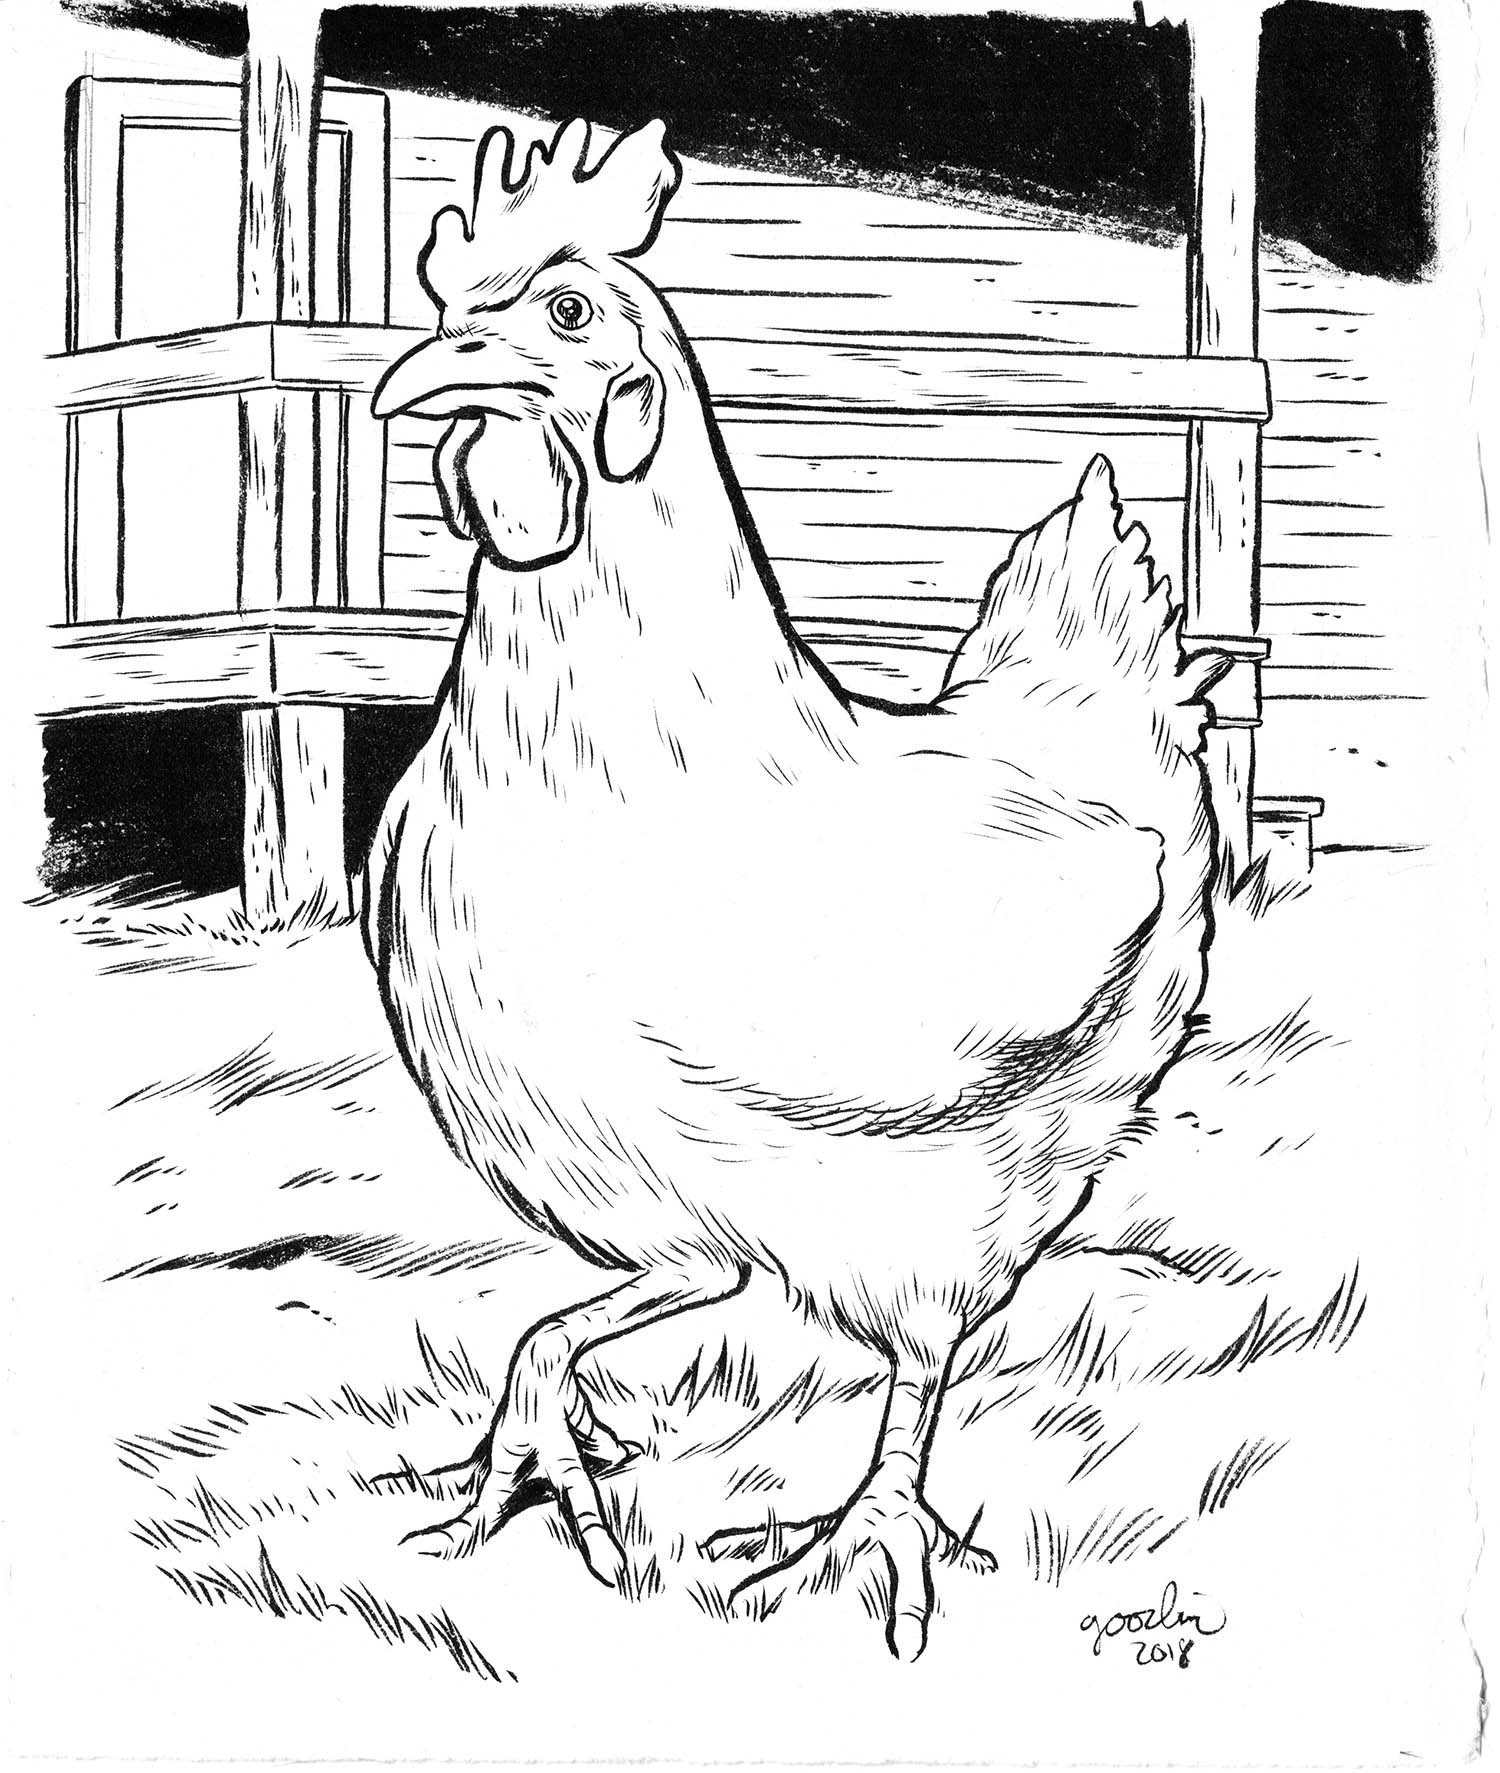 Coloring pages â cindy the city chicken